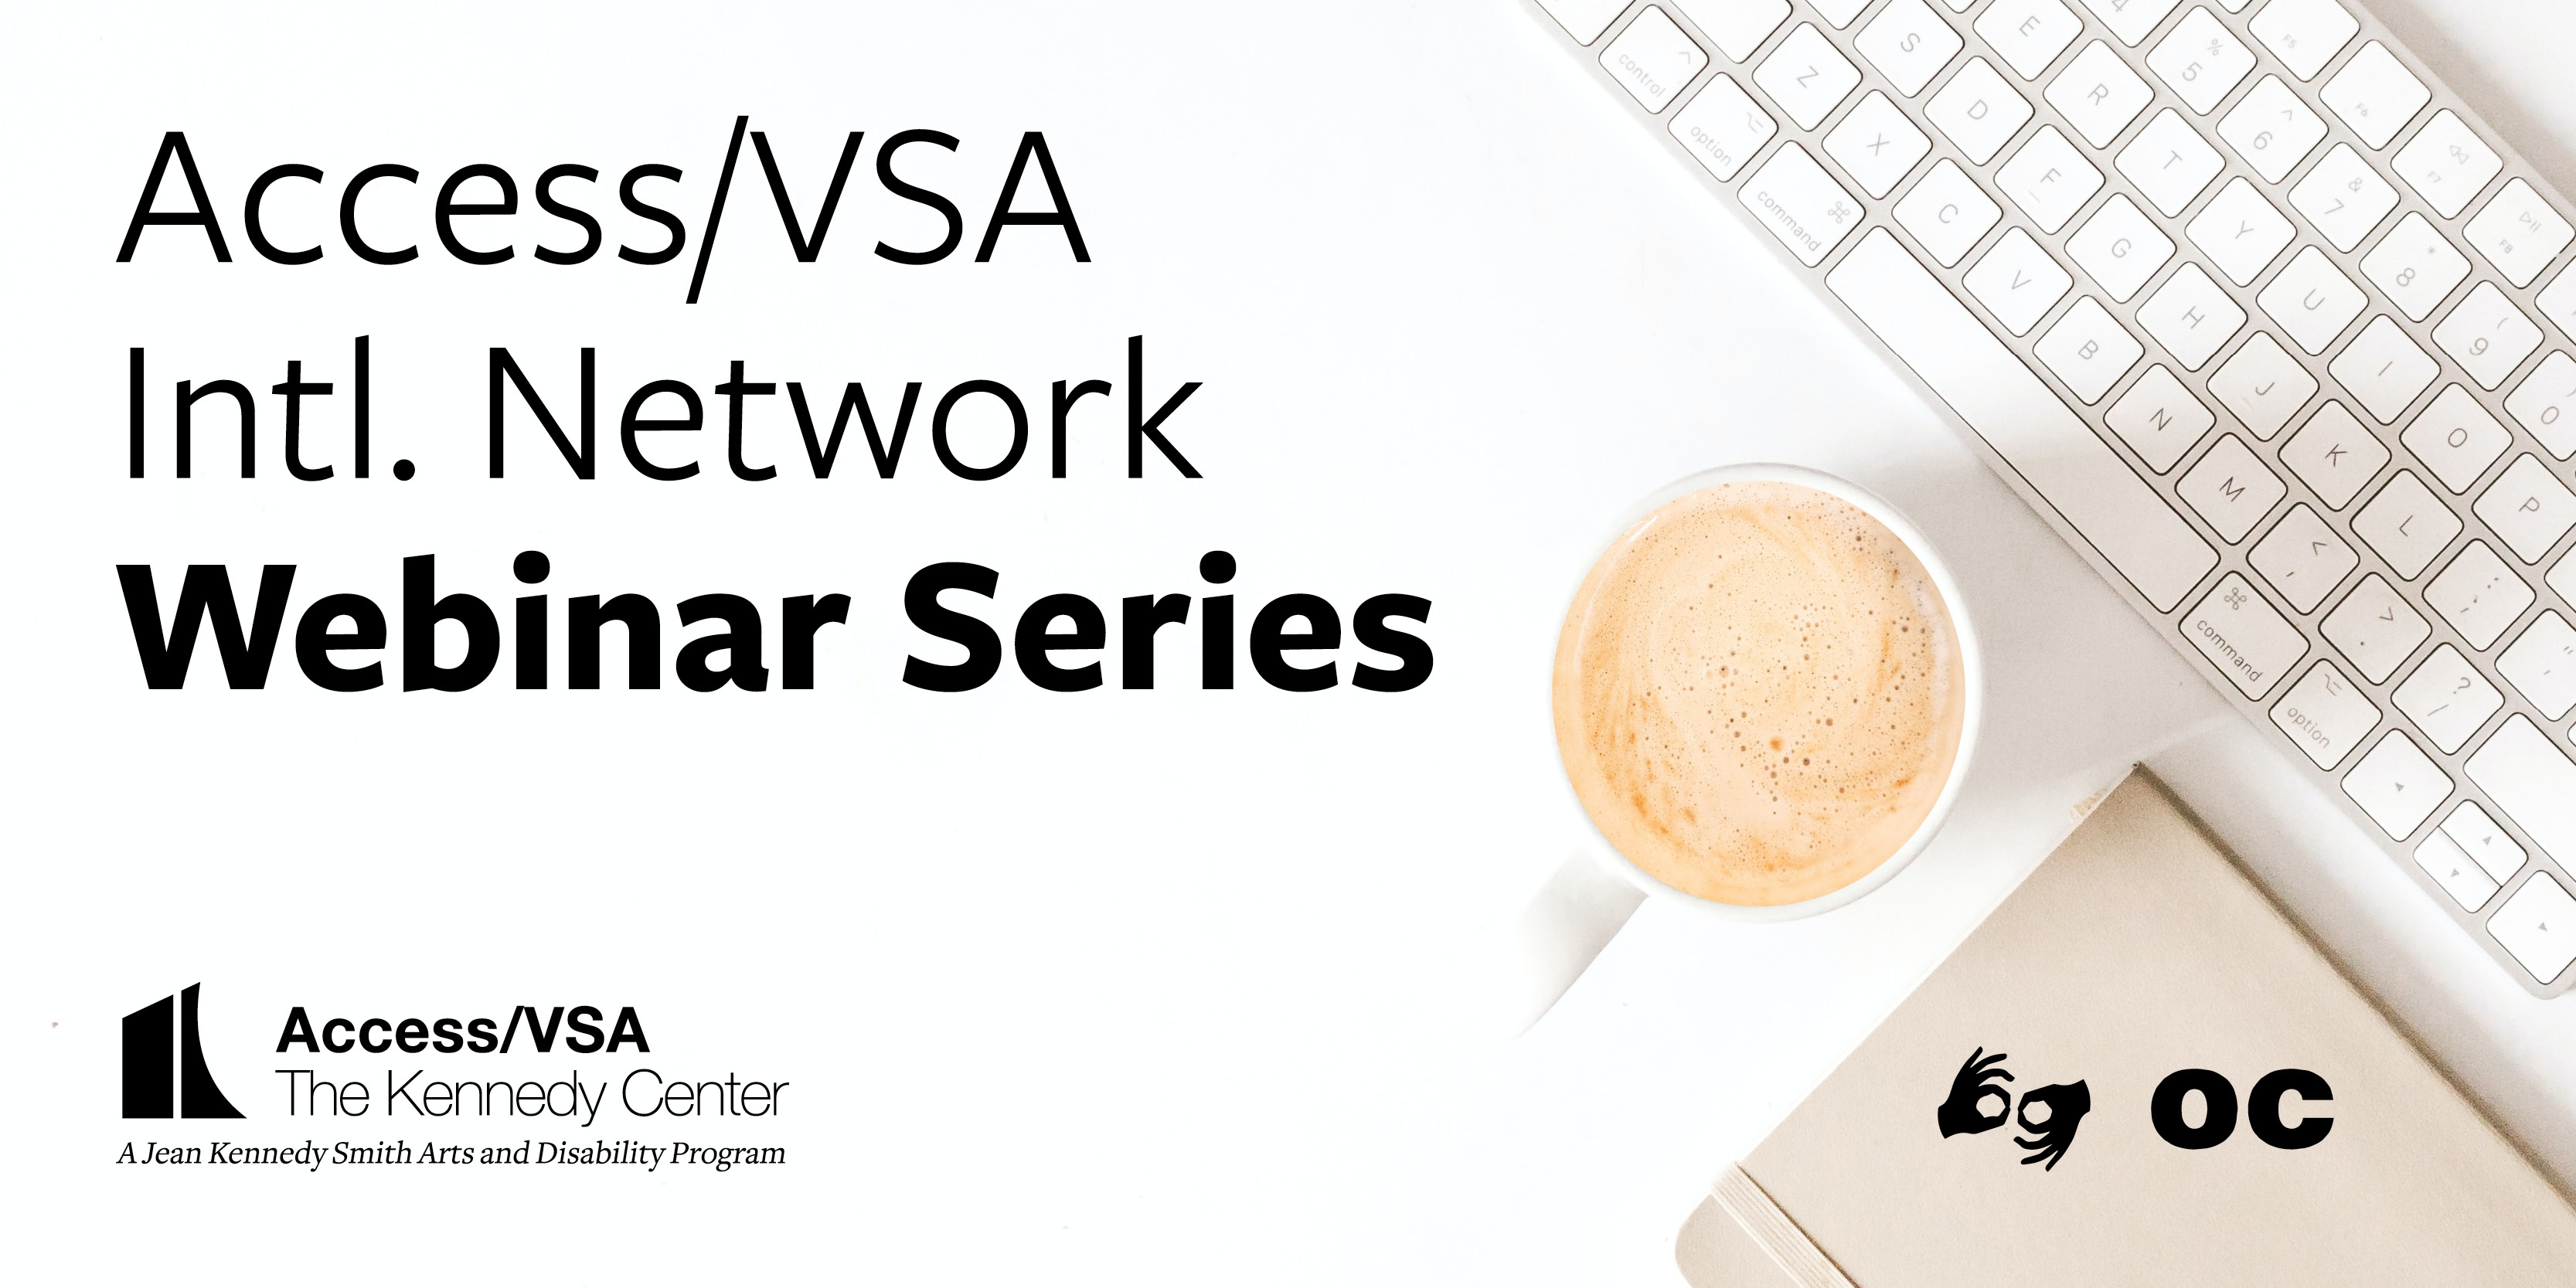 Graphic of a keyboard, coffee cup, and notebook with the text: “Access/VSA Intl. Network Webinar Series.” The Open Captioning and ASL Interpreting logos appear in black.